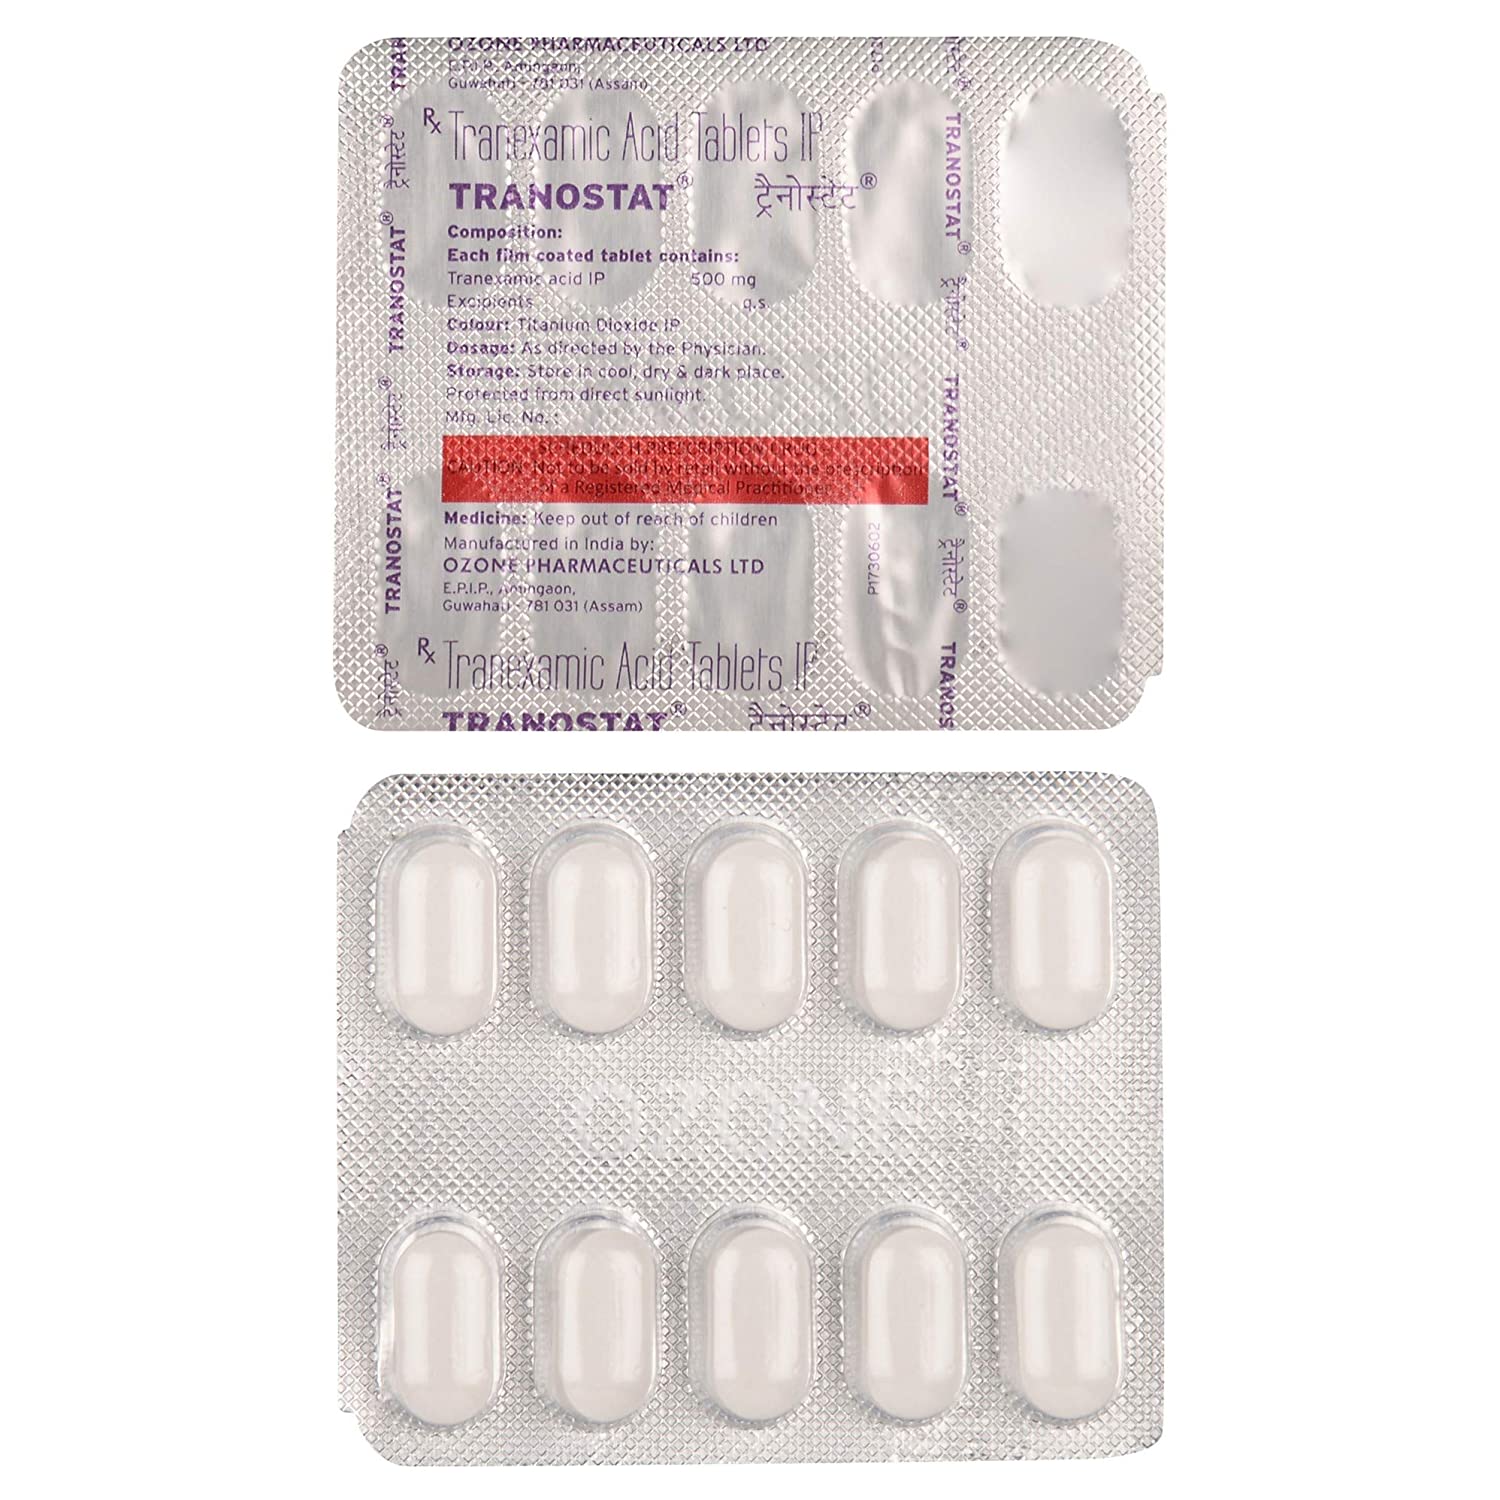 Positrarx Your Local Online Pharmacy Tranostat 500 Mg Tablet